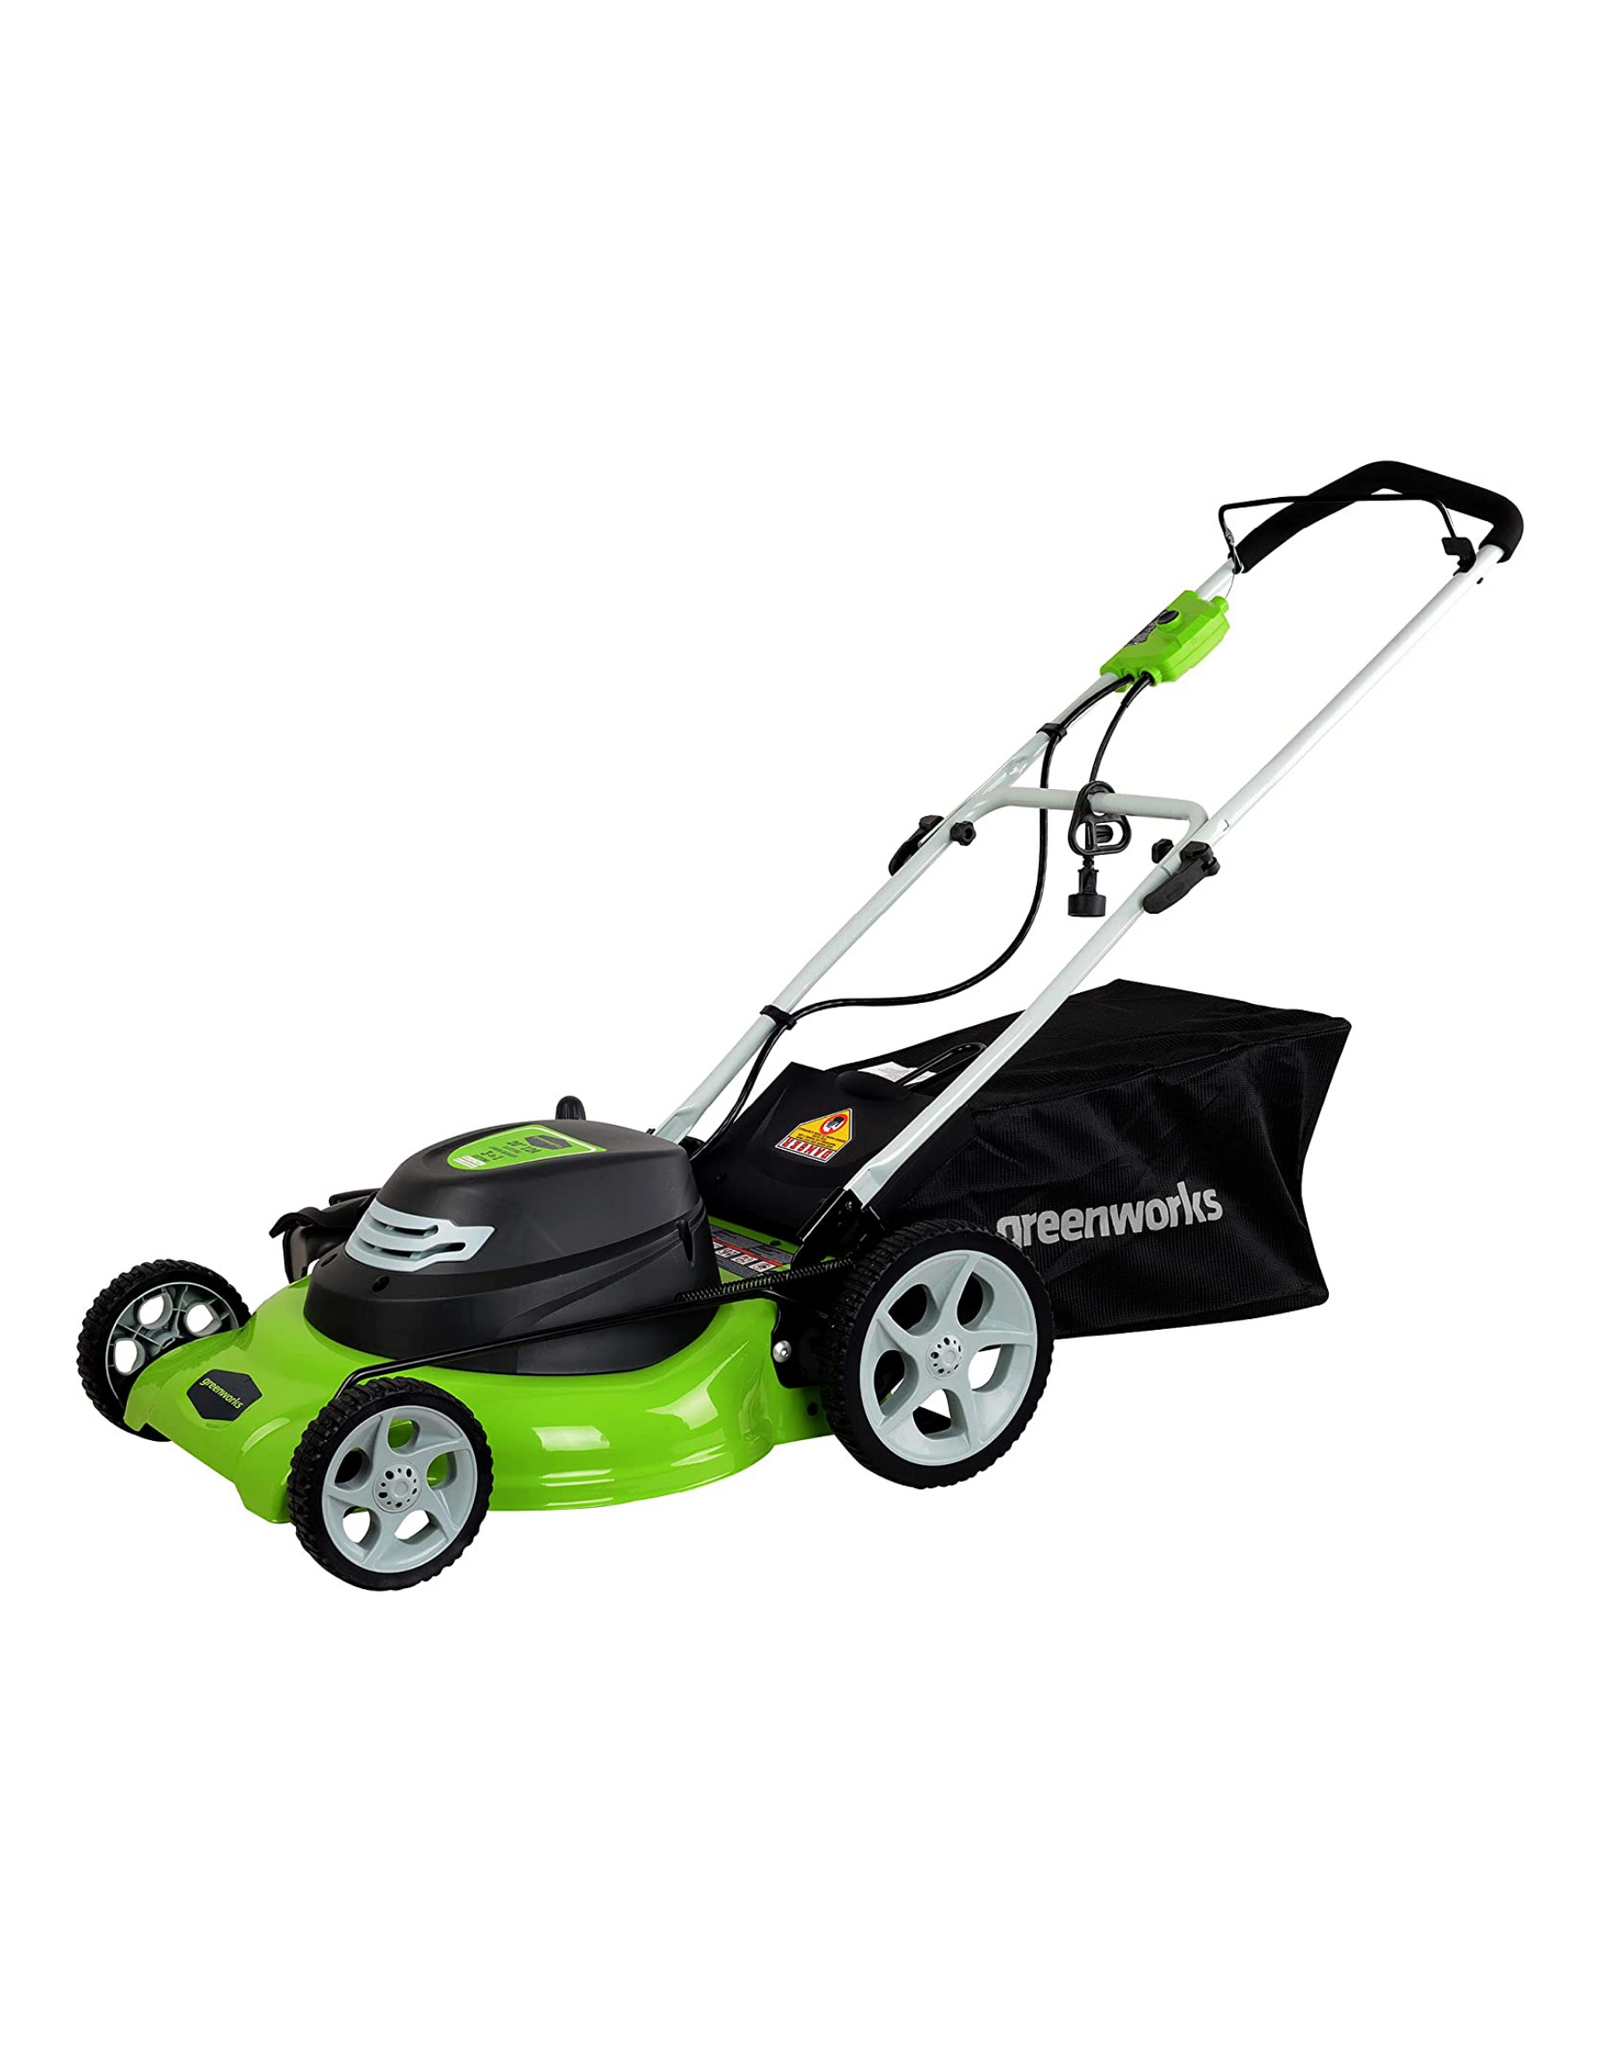 Greenworks 12 Amp 20 Inch Lawn Mower 25022, 3-in-1 Electric Corded, Black and Green